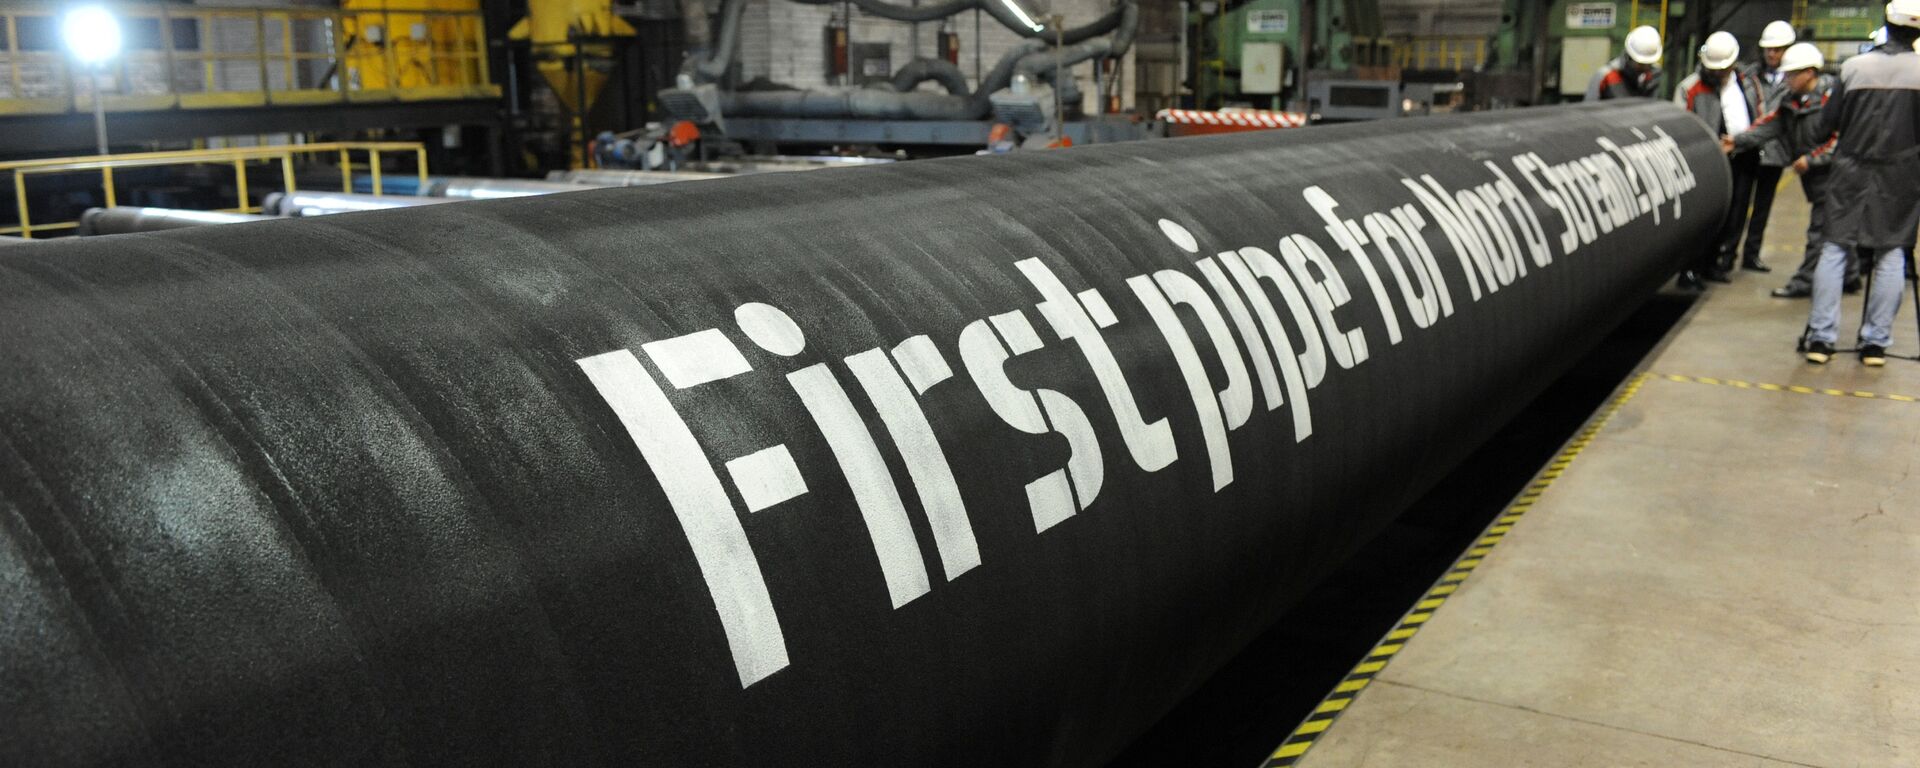 A handout by Nord Stream 2 claims to show the first pipes for the Nord Stream 2 project at a plant of OMK, which is one of the three pipe suppliers selected by Nord Stream 2 AG, in Vyksa, Russia, in this undated photo provided to Reuters on March 23, 2017 - Sputnik Moldova, 1920, 23.02.2022